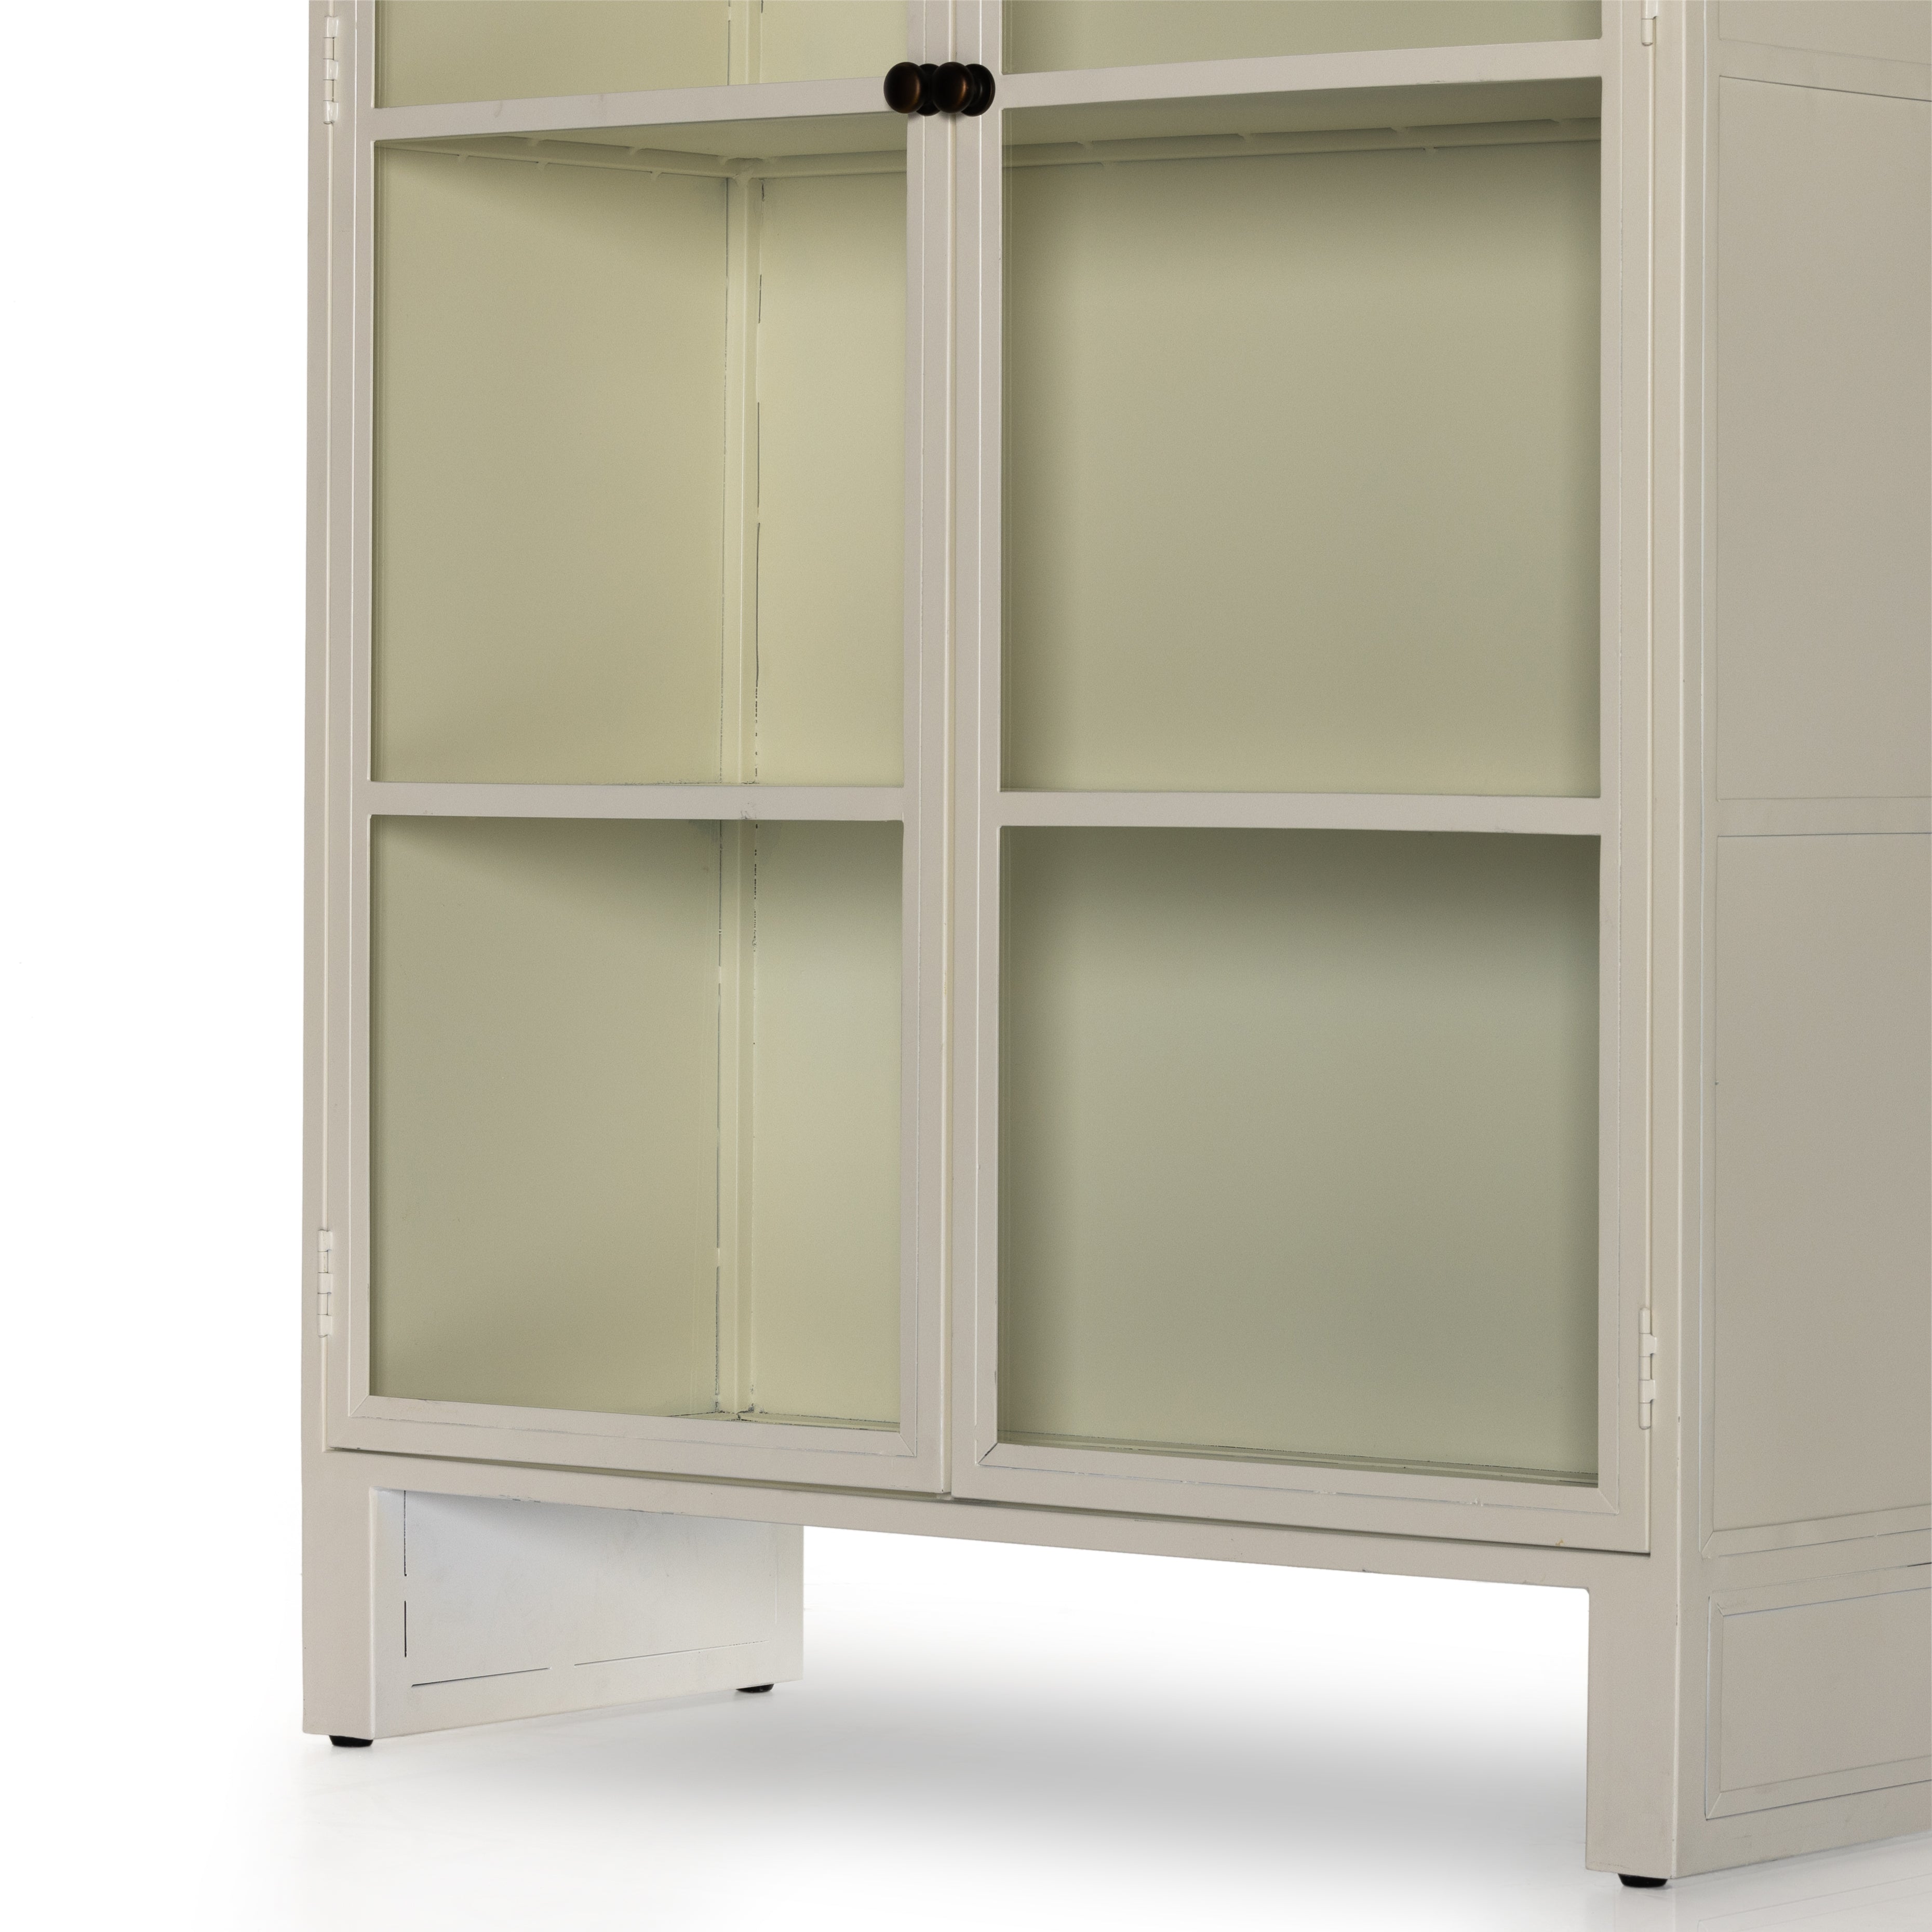 Add a touch of rustic charm to your home with our Breya Cream Powder Coat Cabinet. Its modern design offers ample storage and an elegant look. The powder coat finish ensures durability and a timeless aesthetic. Perfect for any room in your home. Amethyst Home provides interior design, new construction, custom furniture, and area rugs in the Charlotte metro area.